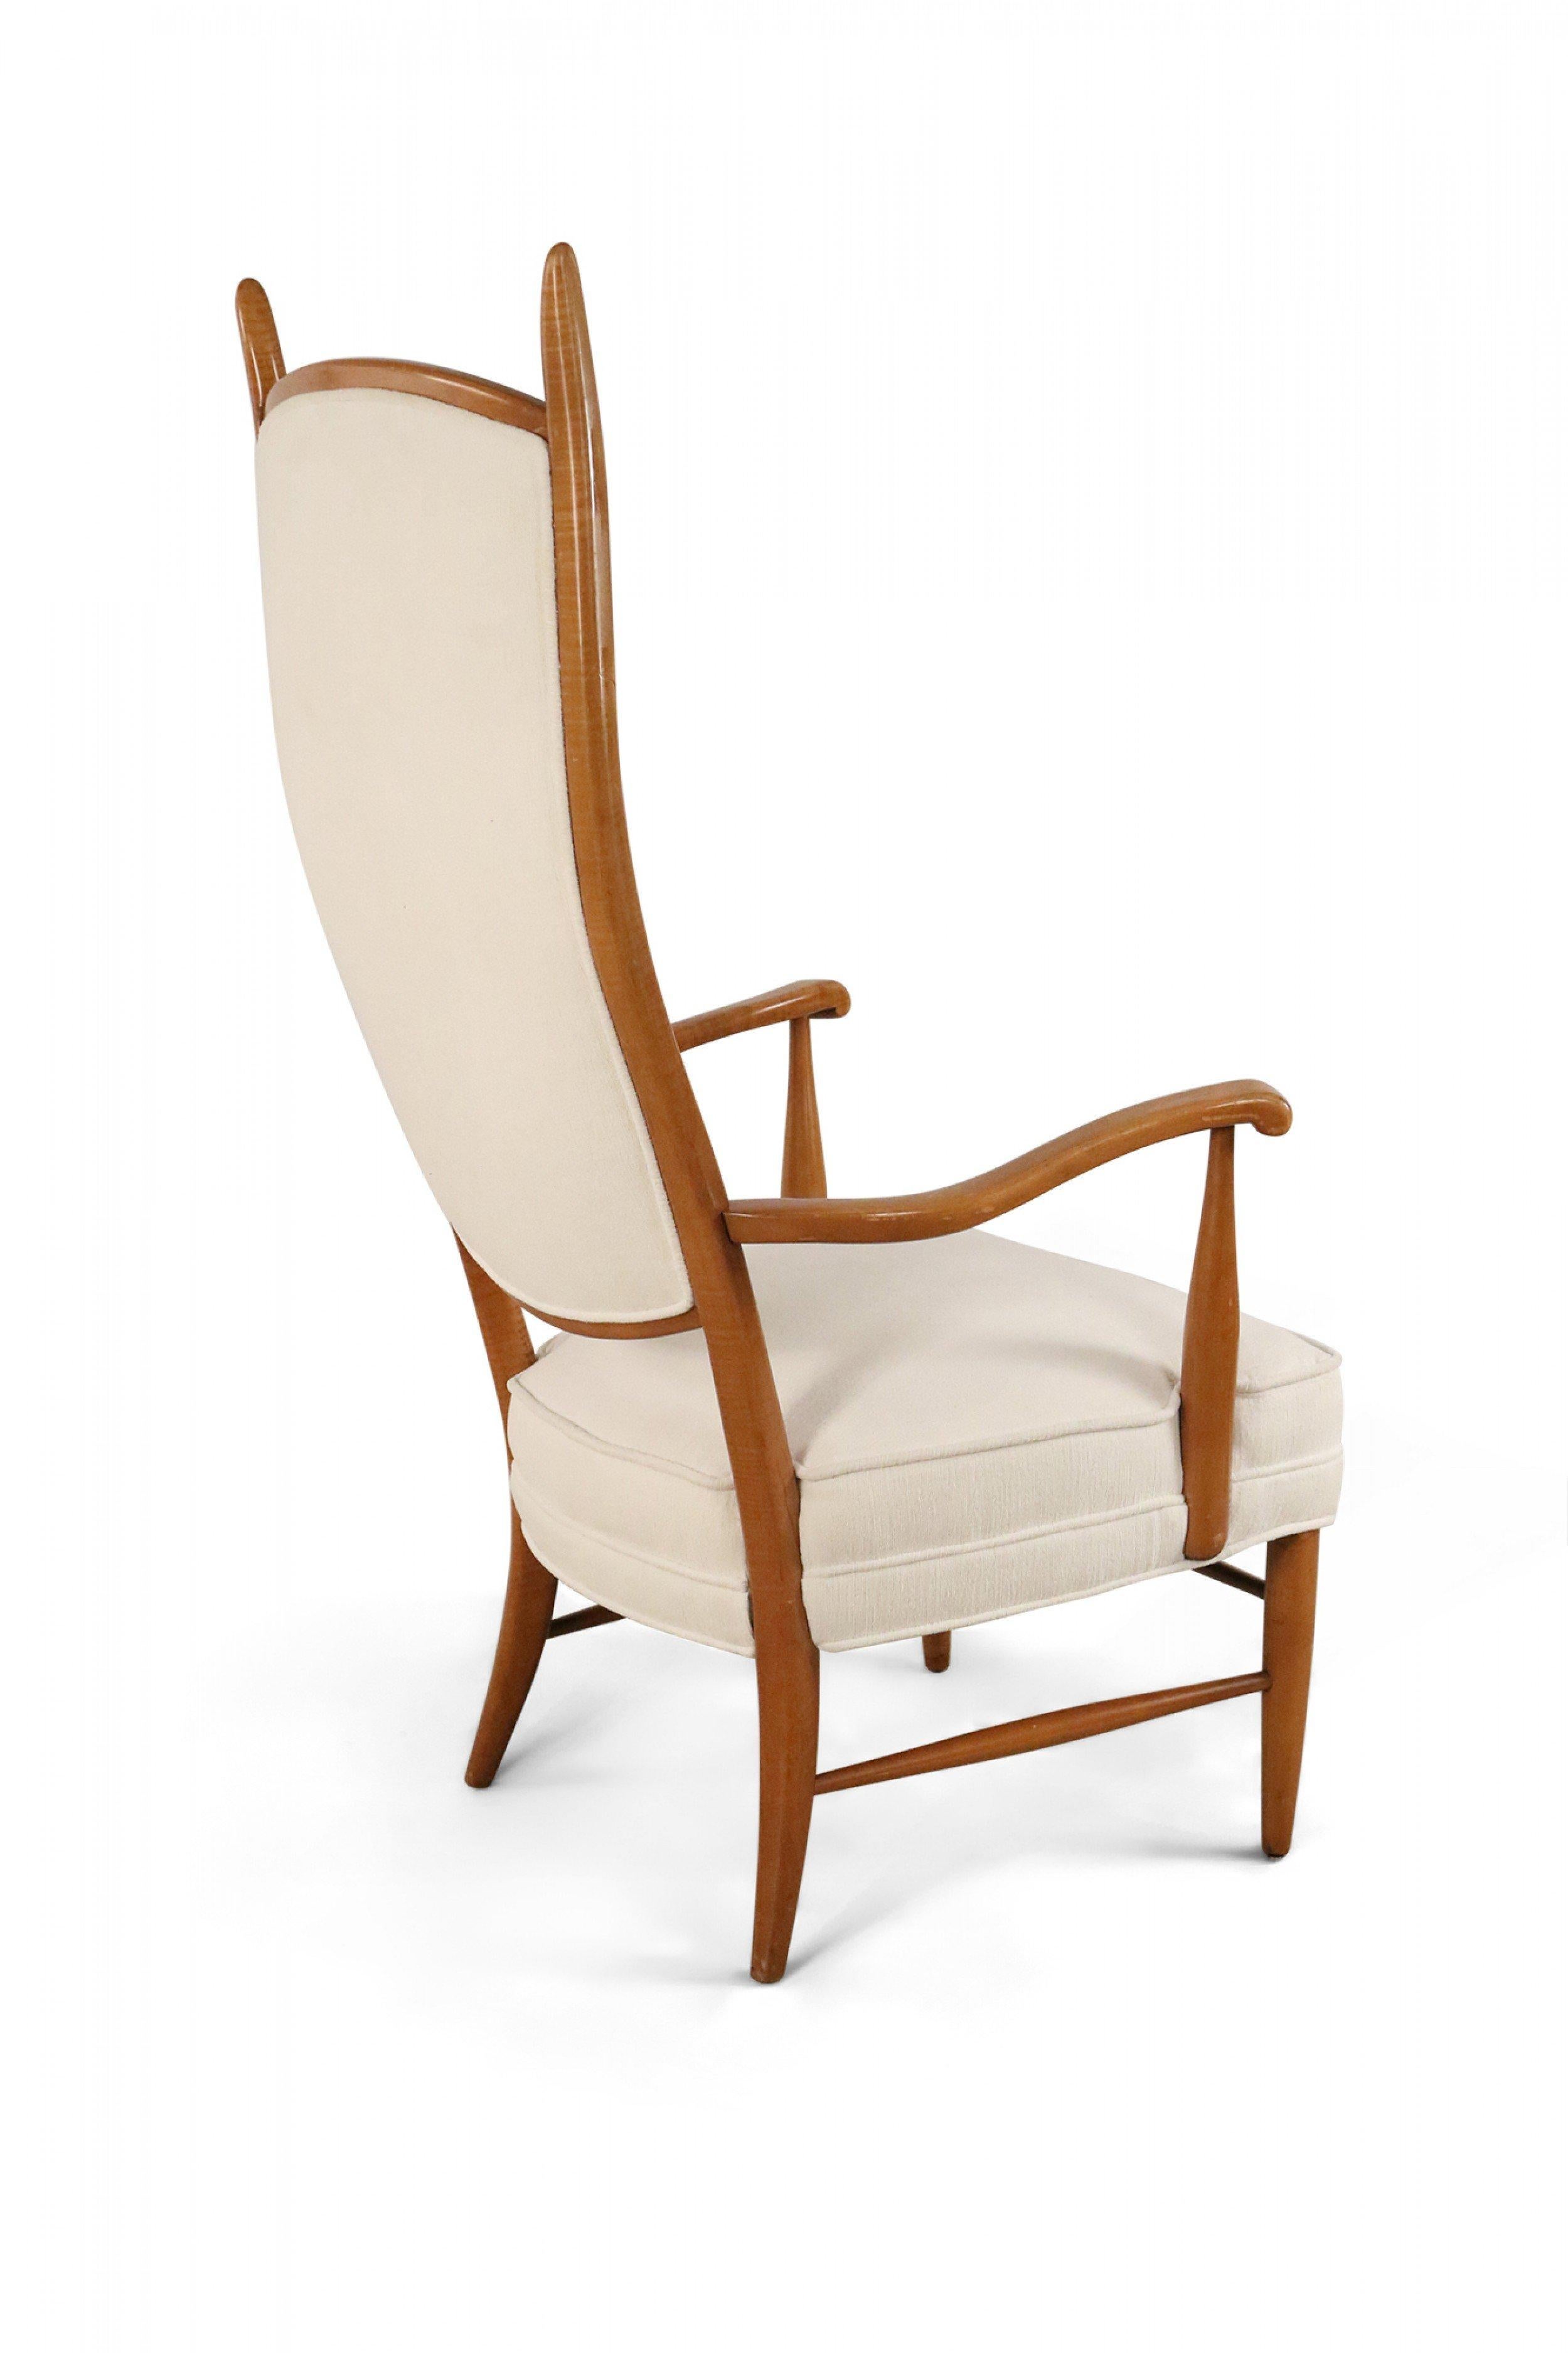 20th Century Edward Wormley Style Midcentury High Back Beige Upholstered Maple Armchair For Sale